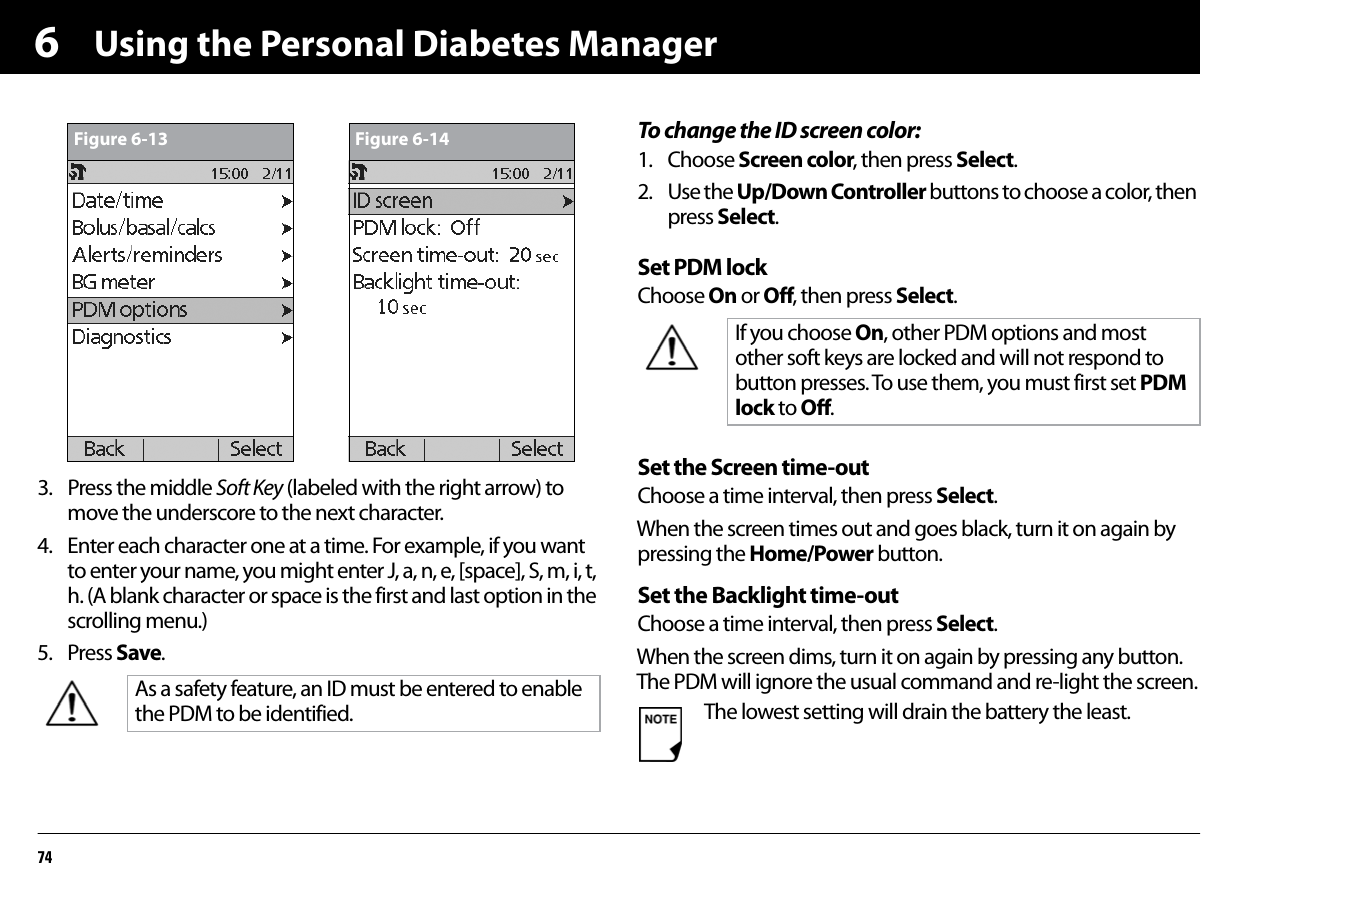 Using the Personal Diabetes Manager7463. Press the middle Soft Key (labeled with the right arrow) to move the underscore to the next character. 4. Enter each character one at a time. For example, if you want to enter your name, you might enter J, a, n, e, [space], S, m, i, t, h. (A blank character or space is the first and last option in the scrolling menu.)5. Press Save.To change the ID screen color:1. Choose Screen color, then press Select.2. Use the Up/Down Controller buttons to choose a color, then press Select.Set PDM lockChoose On or Off, then press Select.Set the Screen time-outChoose a time interval, then press Select.When the screen times out and goes black, turn it on again by pressing the Home/Power button.Set the Backlight time-outChoose a time interval, then press Select.When the screen dims, turn it on again by pressing any button. The PDM will ignore the usual command and re-light the screen.As a safety feature, an ID must be entered to enable the PDM to be identified.Figure 6-13 Figure 6-14If you choose On, other PDM options and most other soft keys are locked and will not respond to button presses. To use them, you must first set PDM lock to Off.The lowest setting will drain the battery the least.